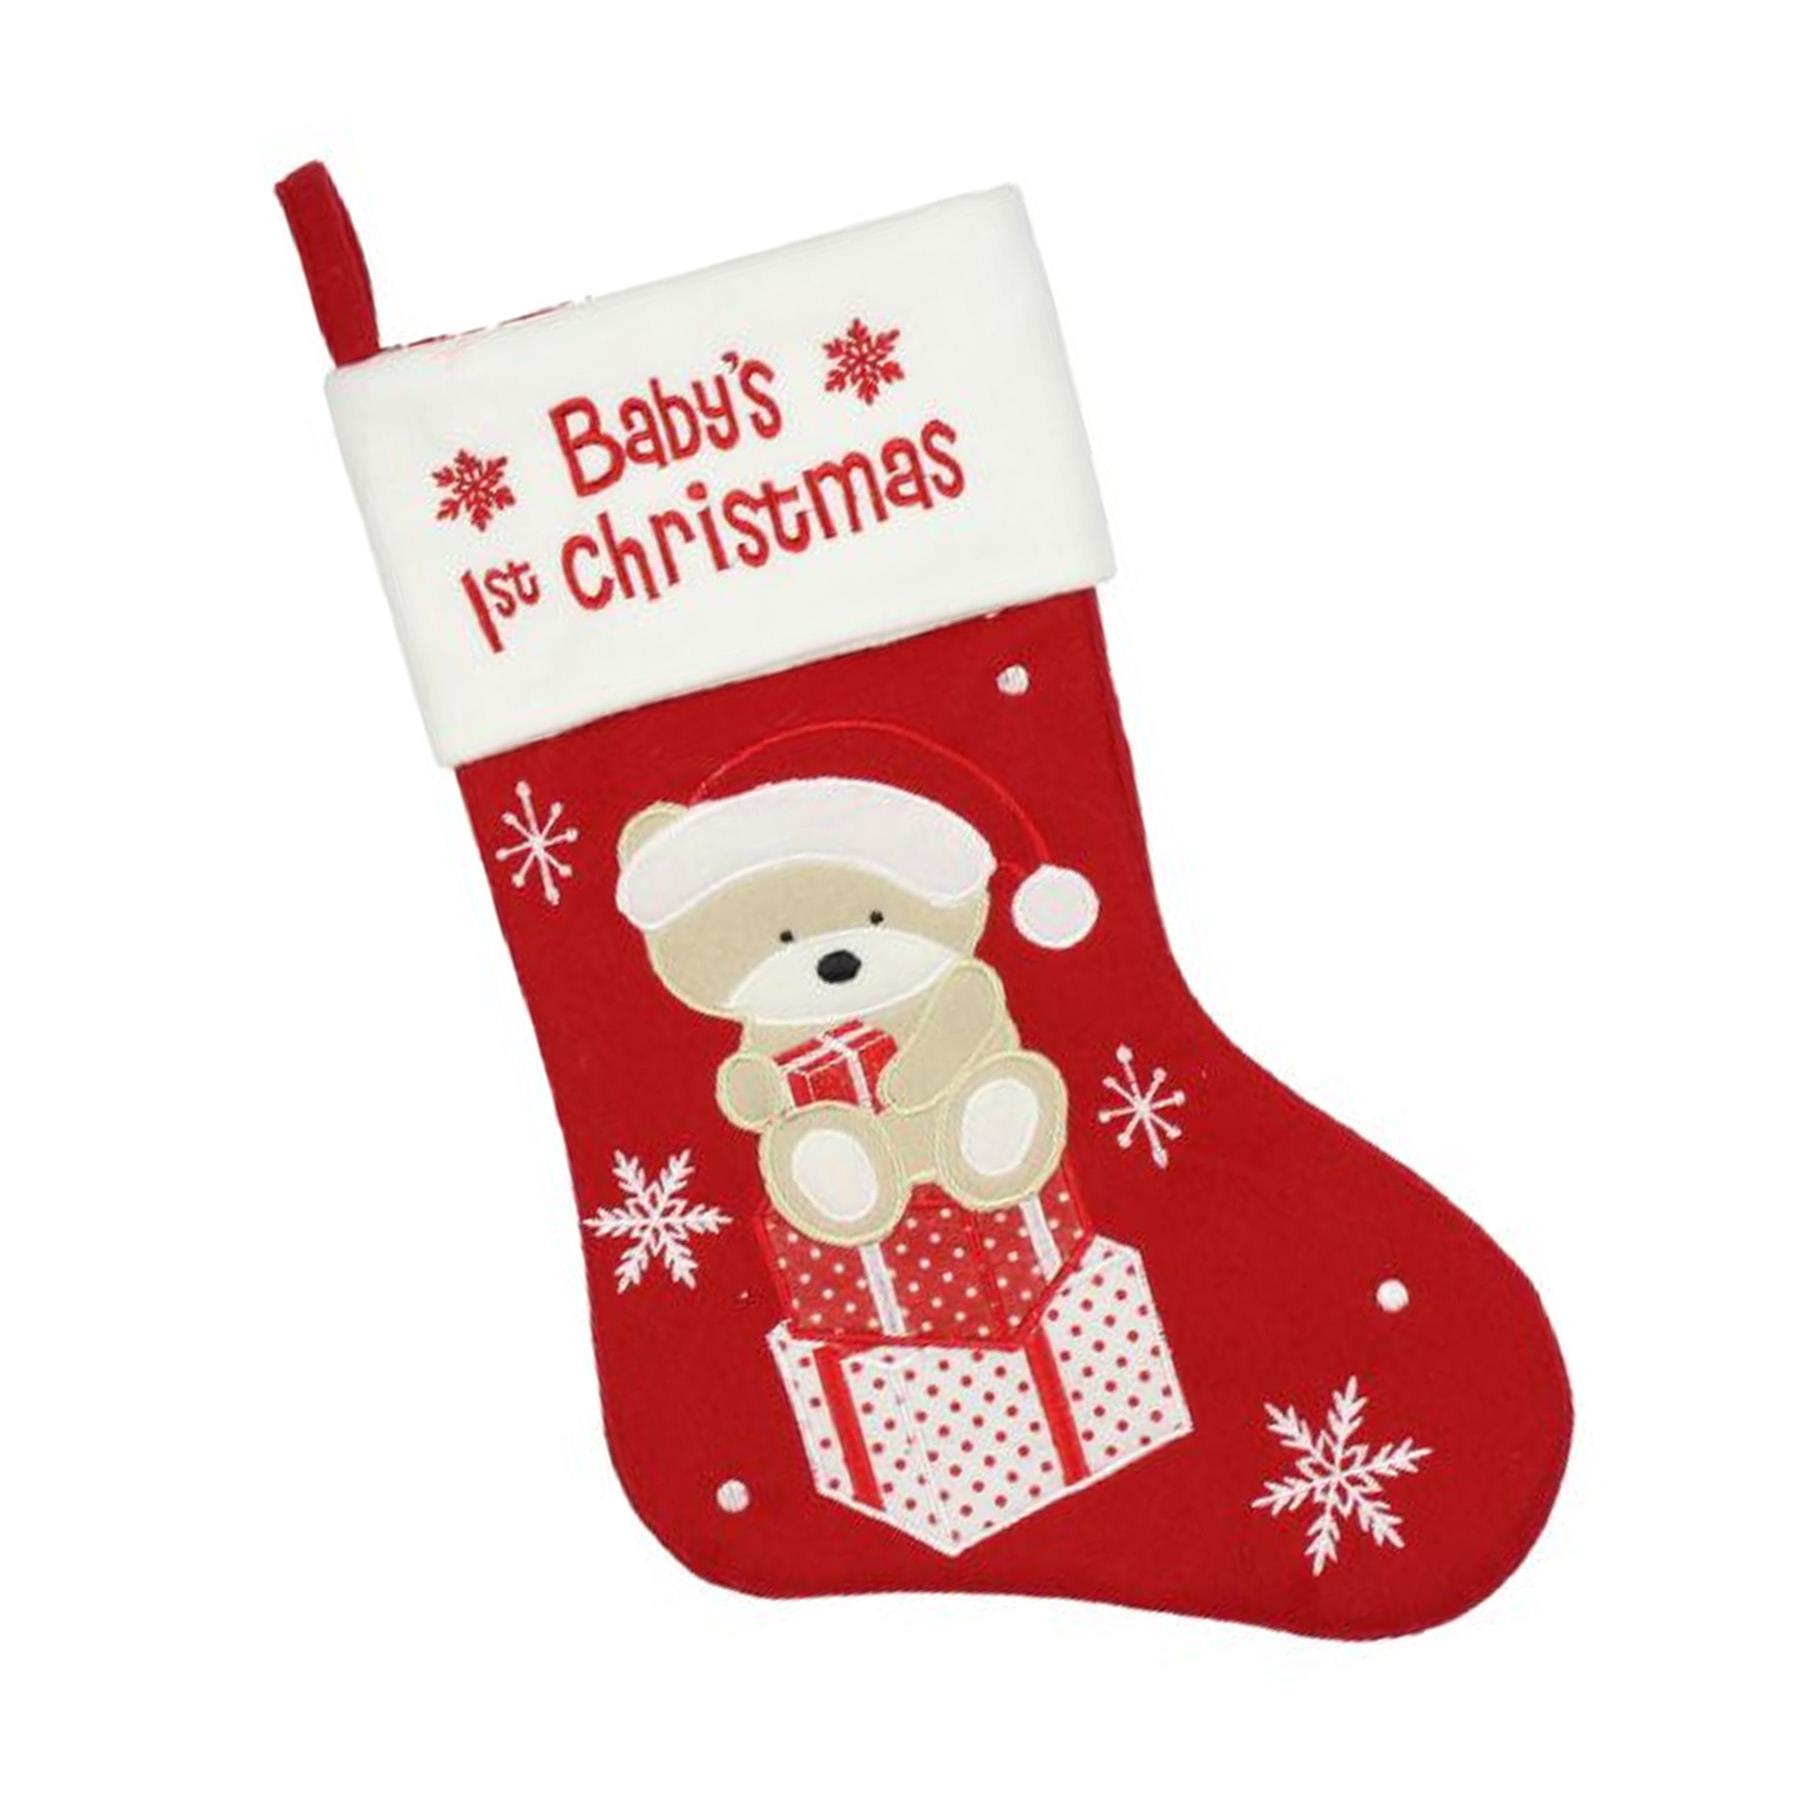 Baby's 1st Christmas Keepsake Stocking with Embroidered Teddy Fully Lined